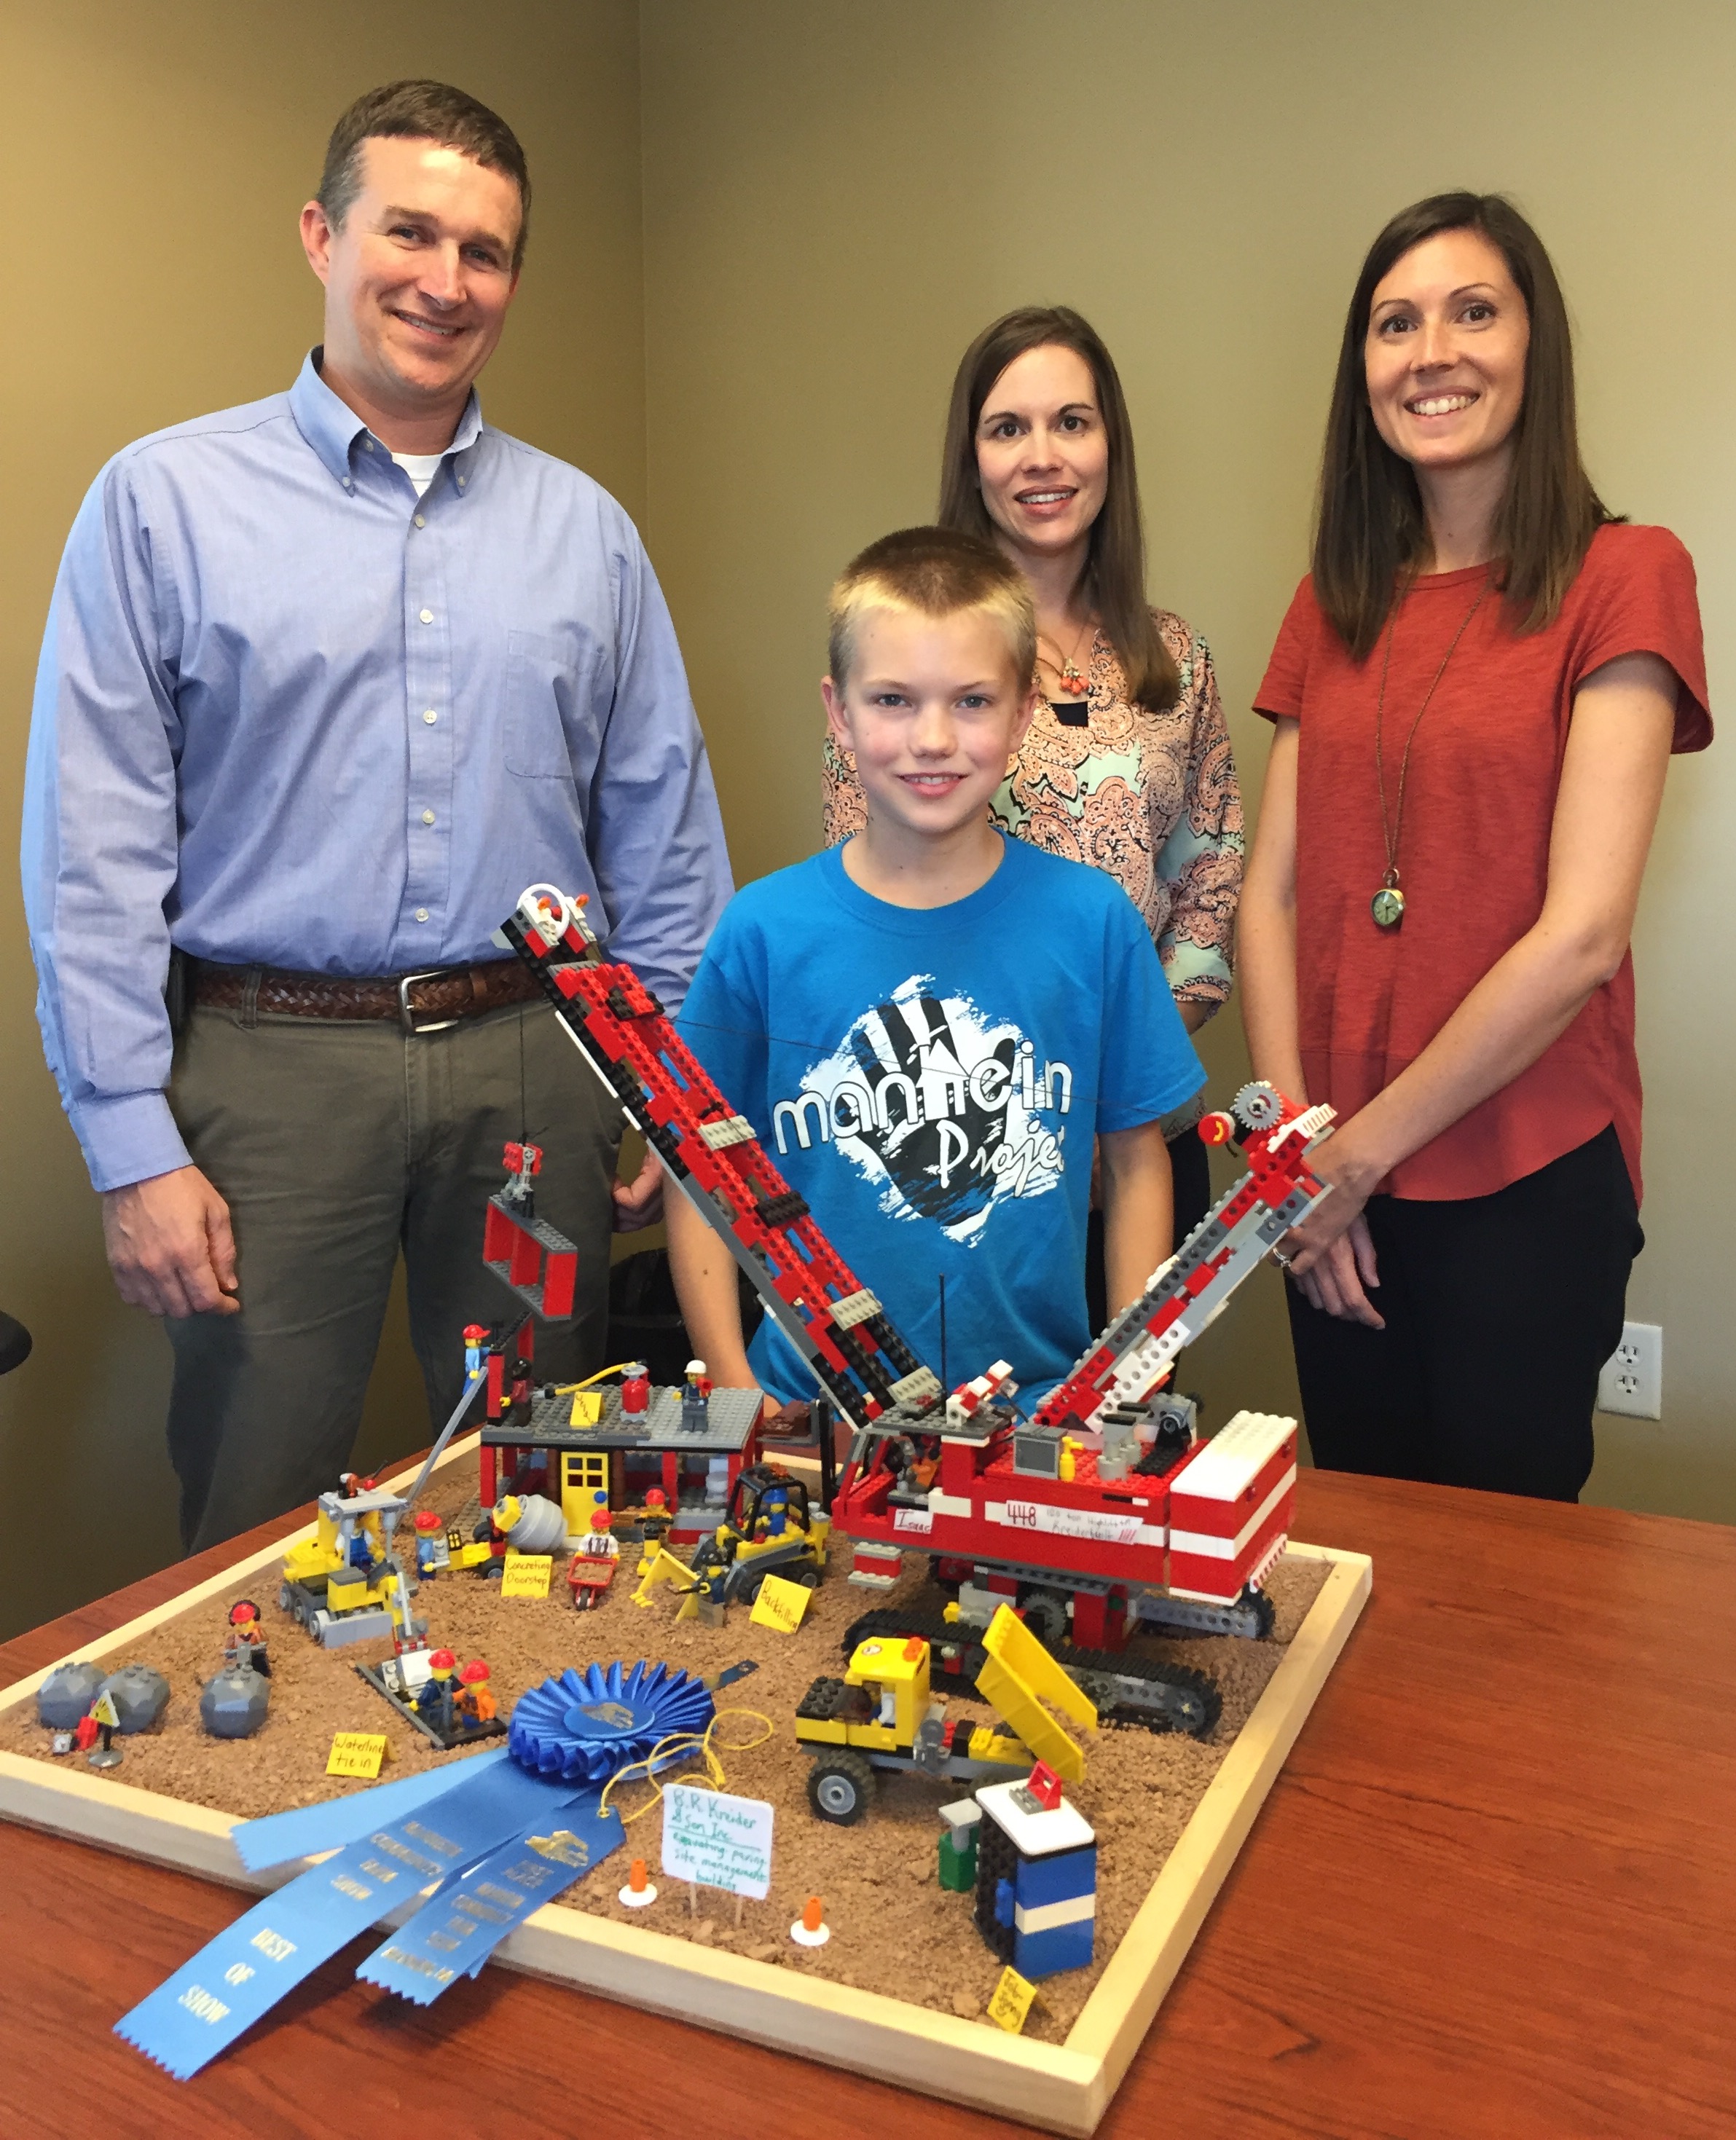 Isaac Kreider (front) displays his Best In Show LEGO creation based on a B.R. Kreider & Son worksite with the company’s fourth generation leadership team (l-r); Brent Kreider, Heidi Hollinger, and Courtney Dougherty.